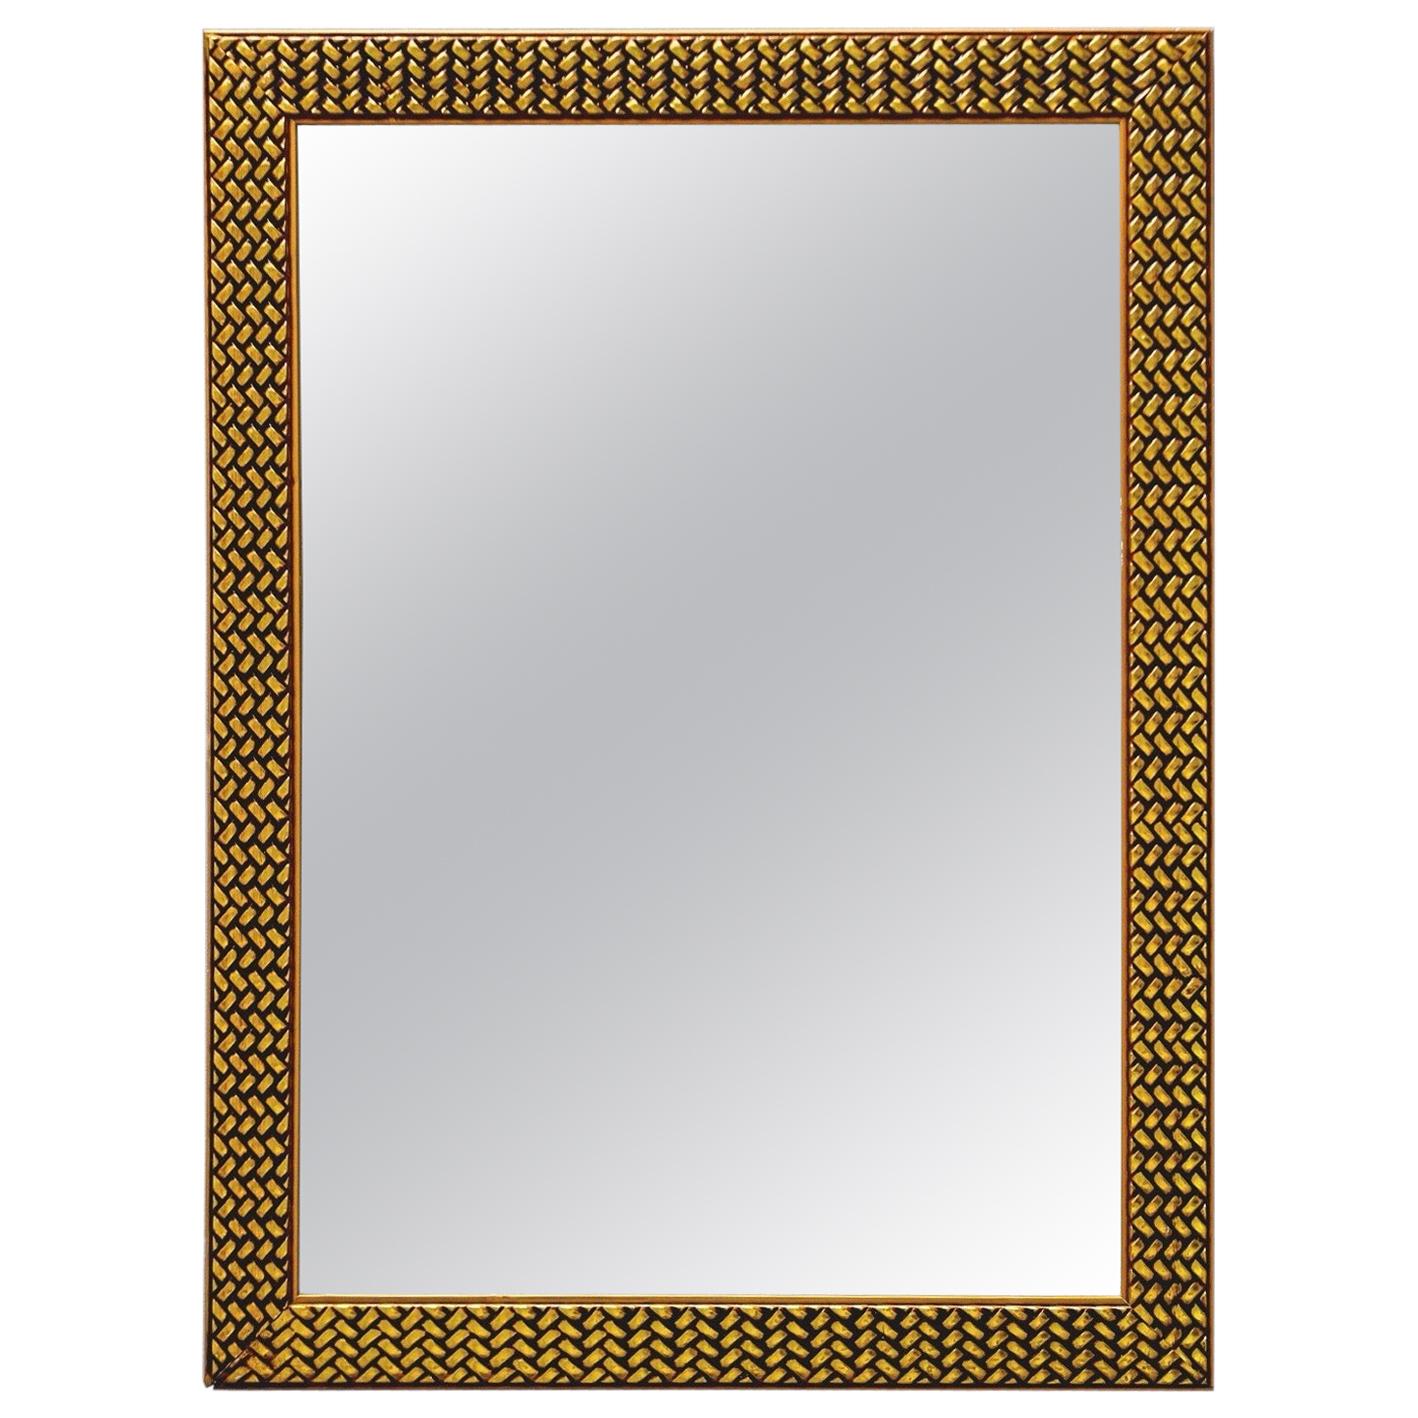 Midcentury Mirror with Woven Texture Gilded Finish Frame